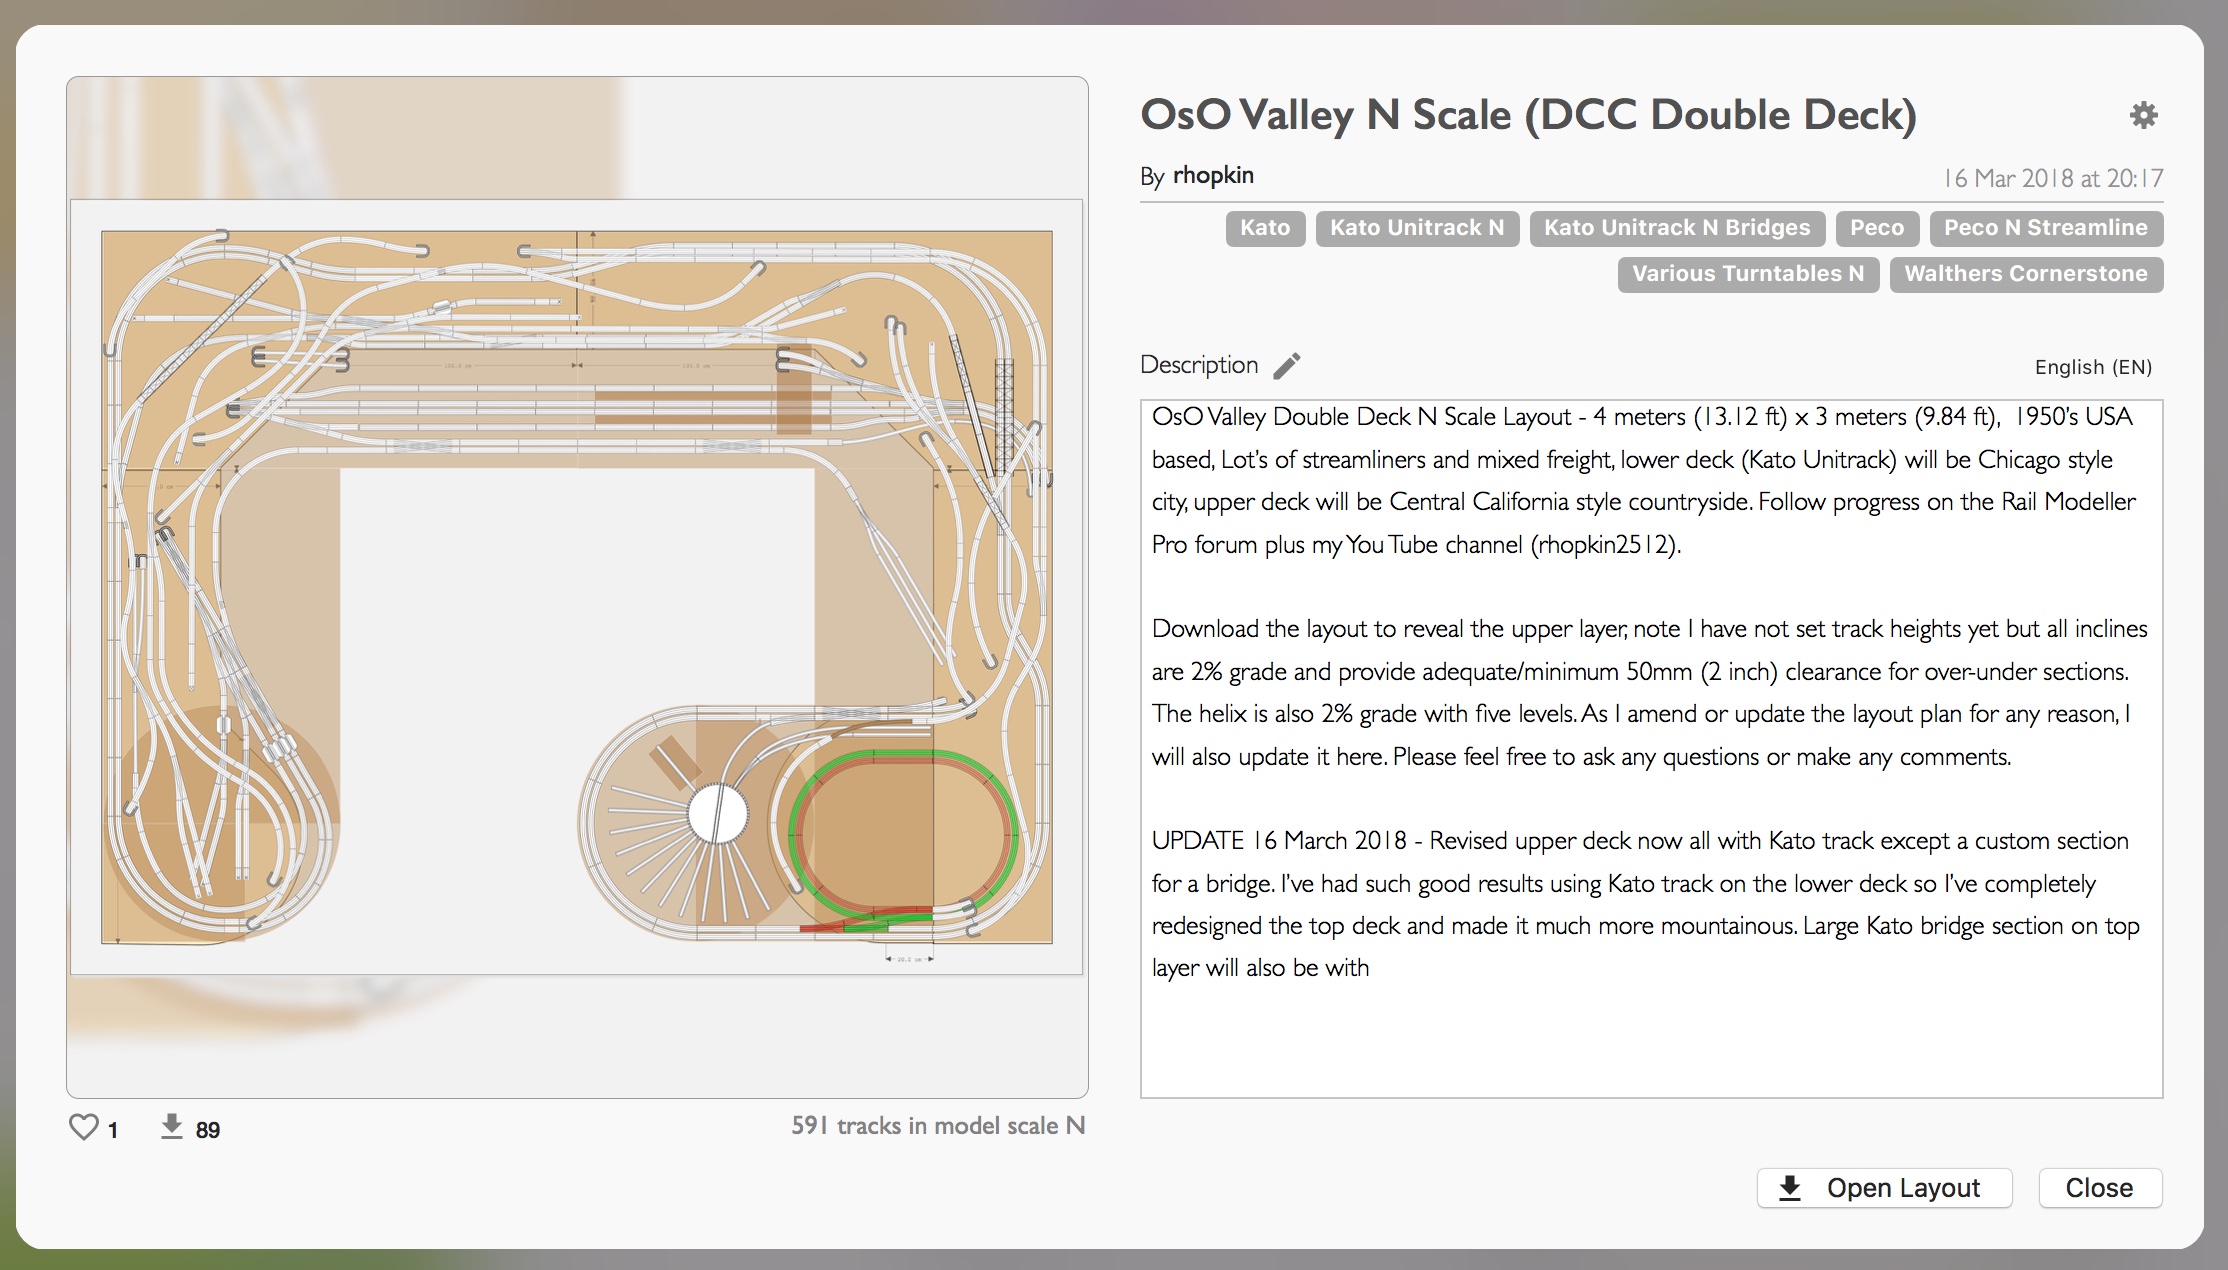 OsO Valley (DCC Double Deck).jpeg